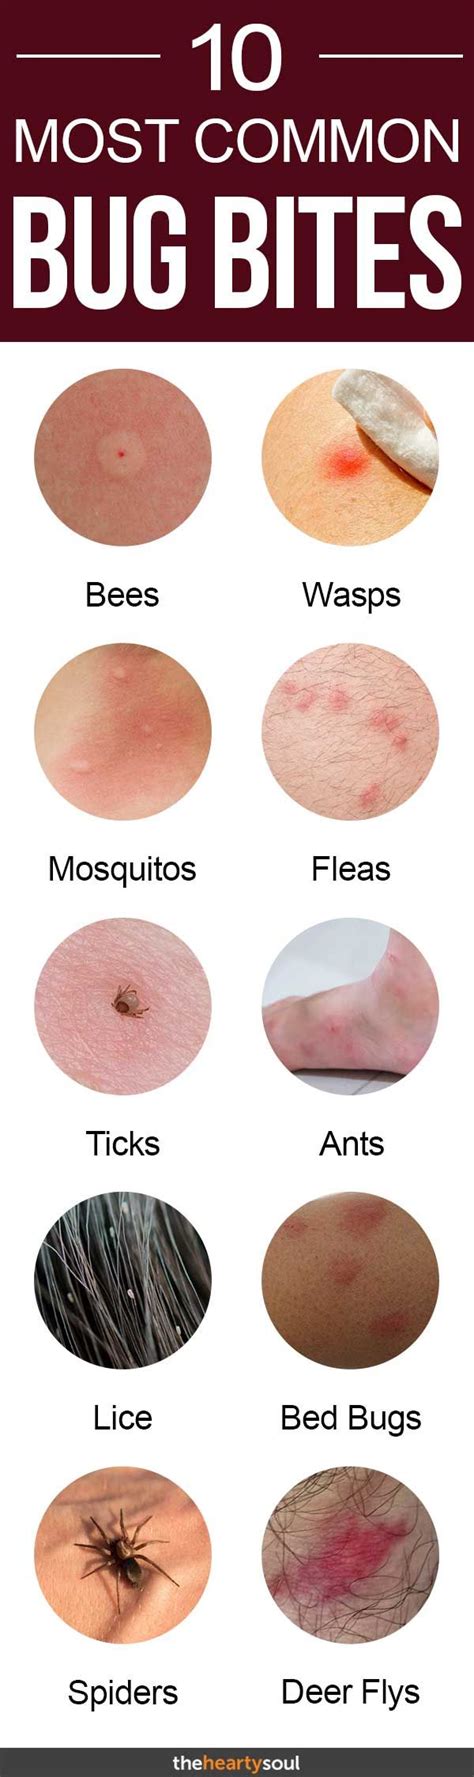 10 Bug Bites Anyone Should Be Able To Identify Insect Bites Infected